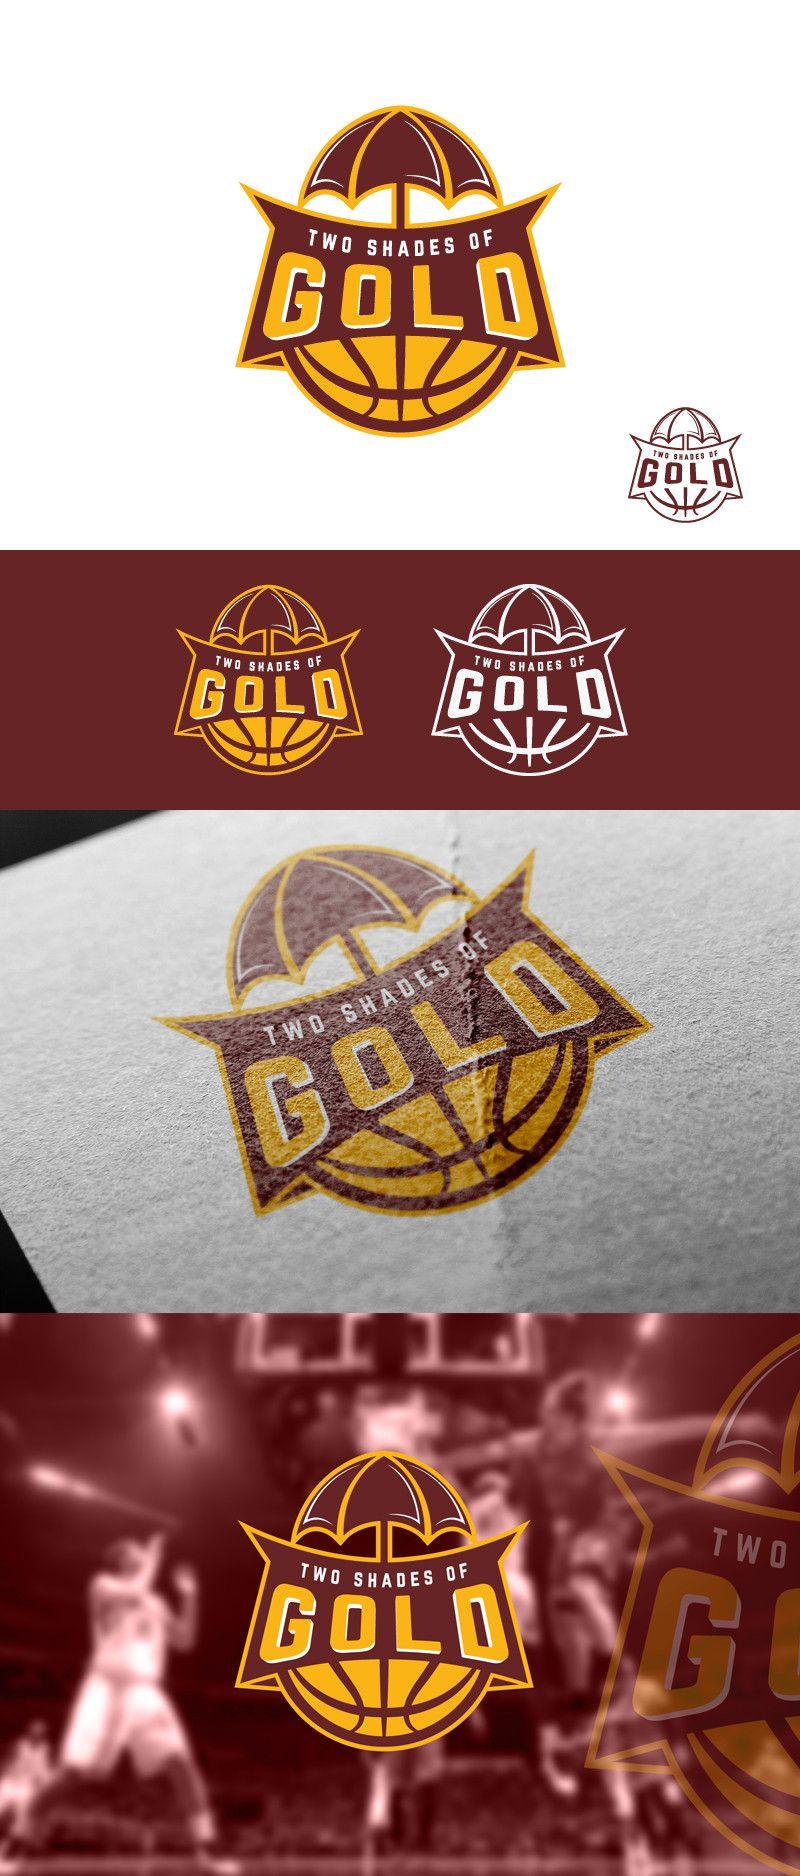 Gold Basketball Logo - Entry #27 by samdesigns23 for Two Shades of Gold Basketball Team ...